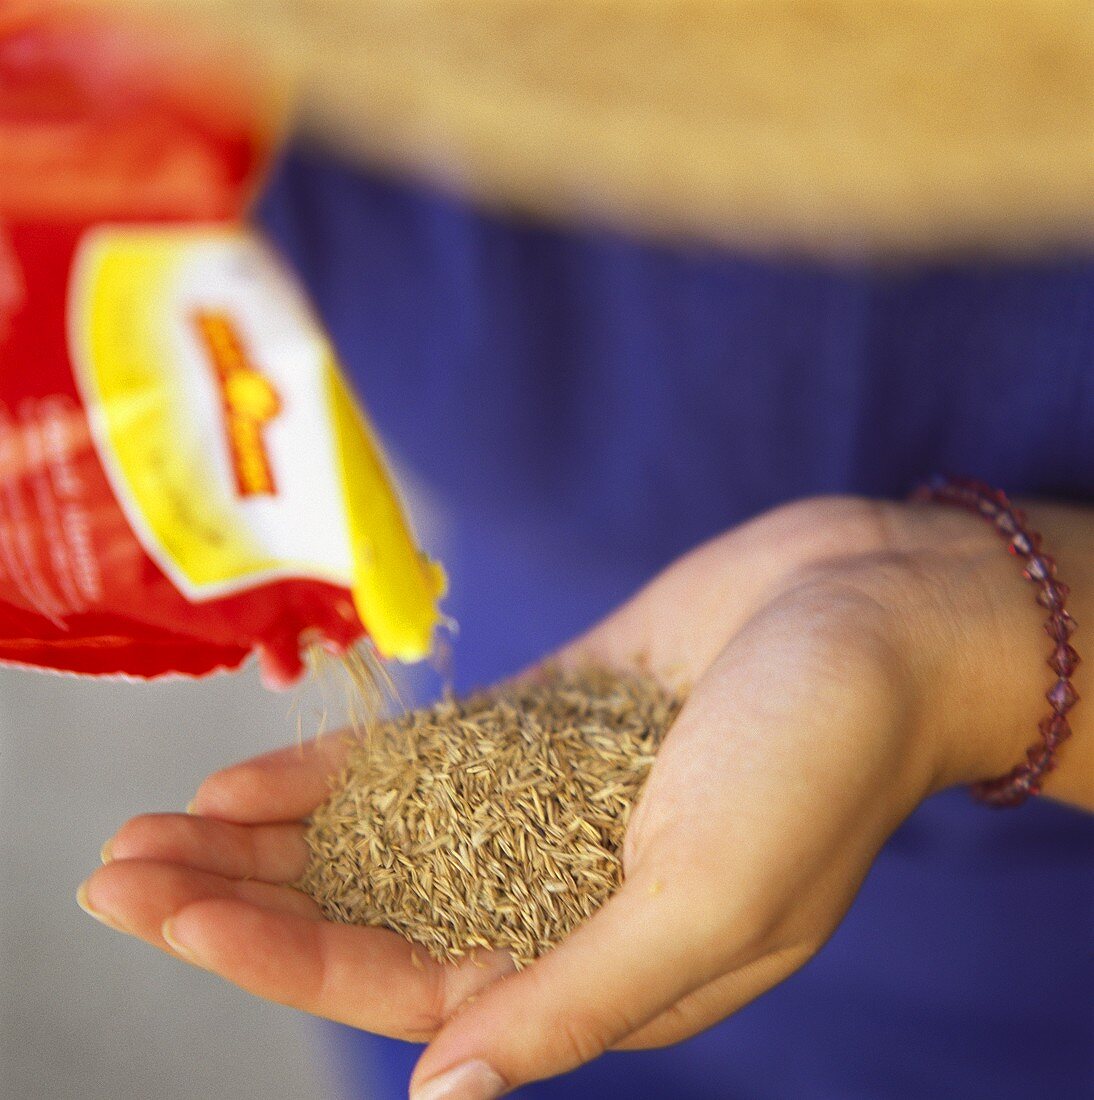 Lawn seed being poured into a hand